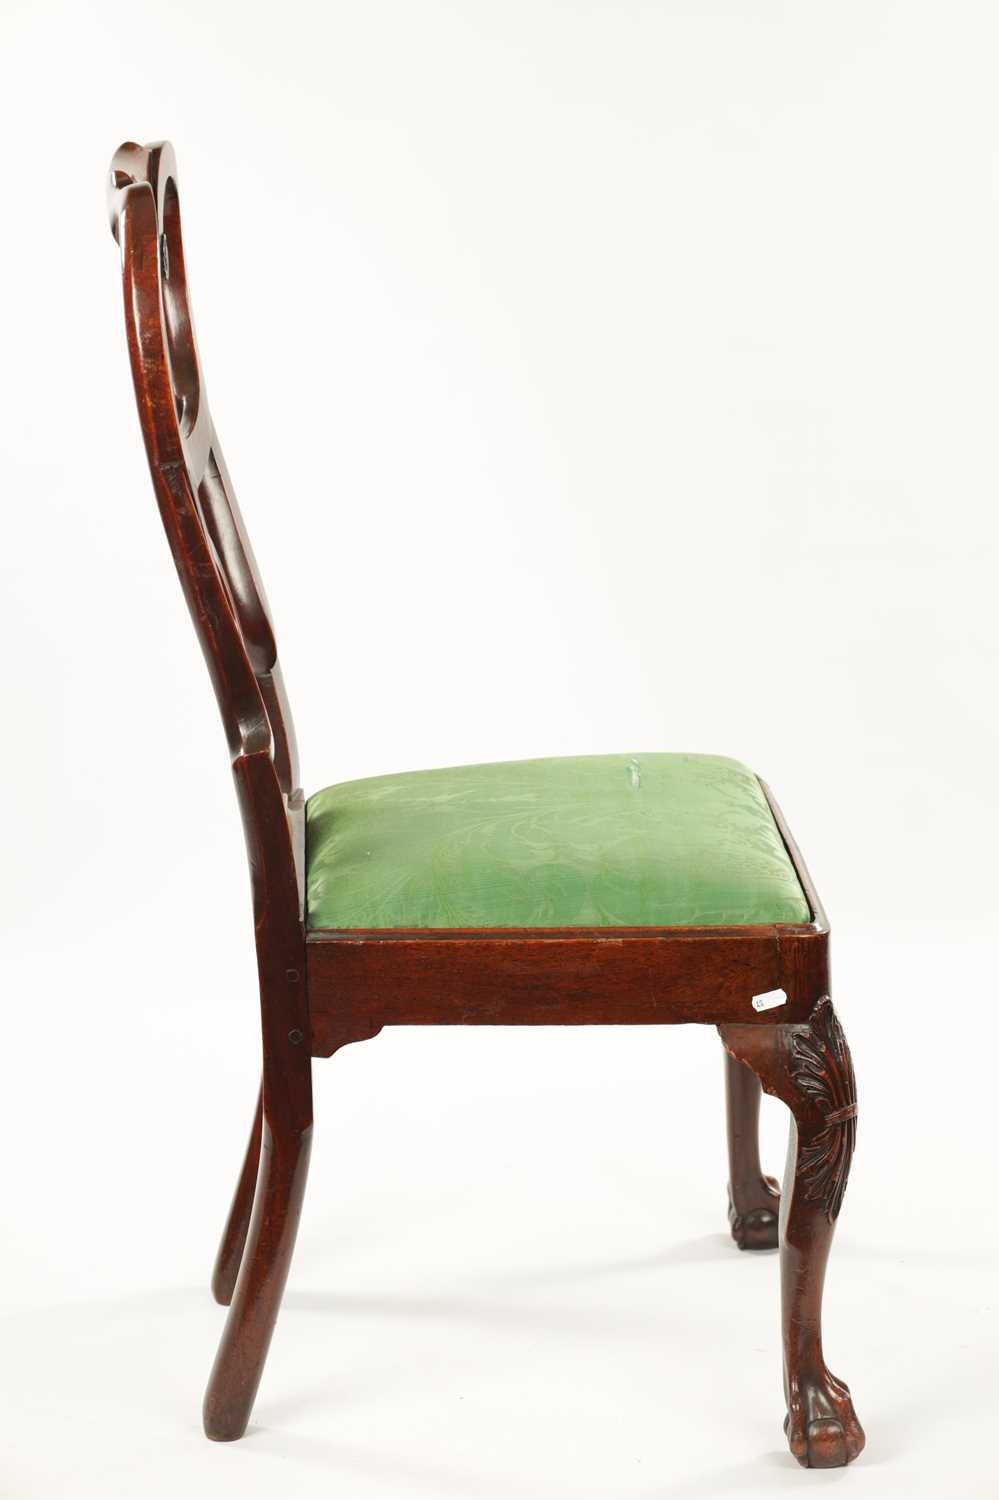 A MID 18TH CENTURY WALNUT SIDE CHAIR IN THE MANNER OF ROBERT MAINWARING - Image 8 of 9